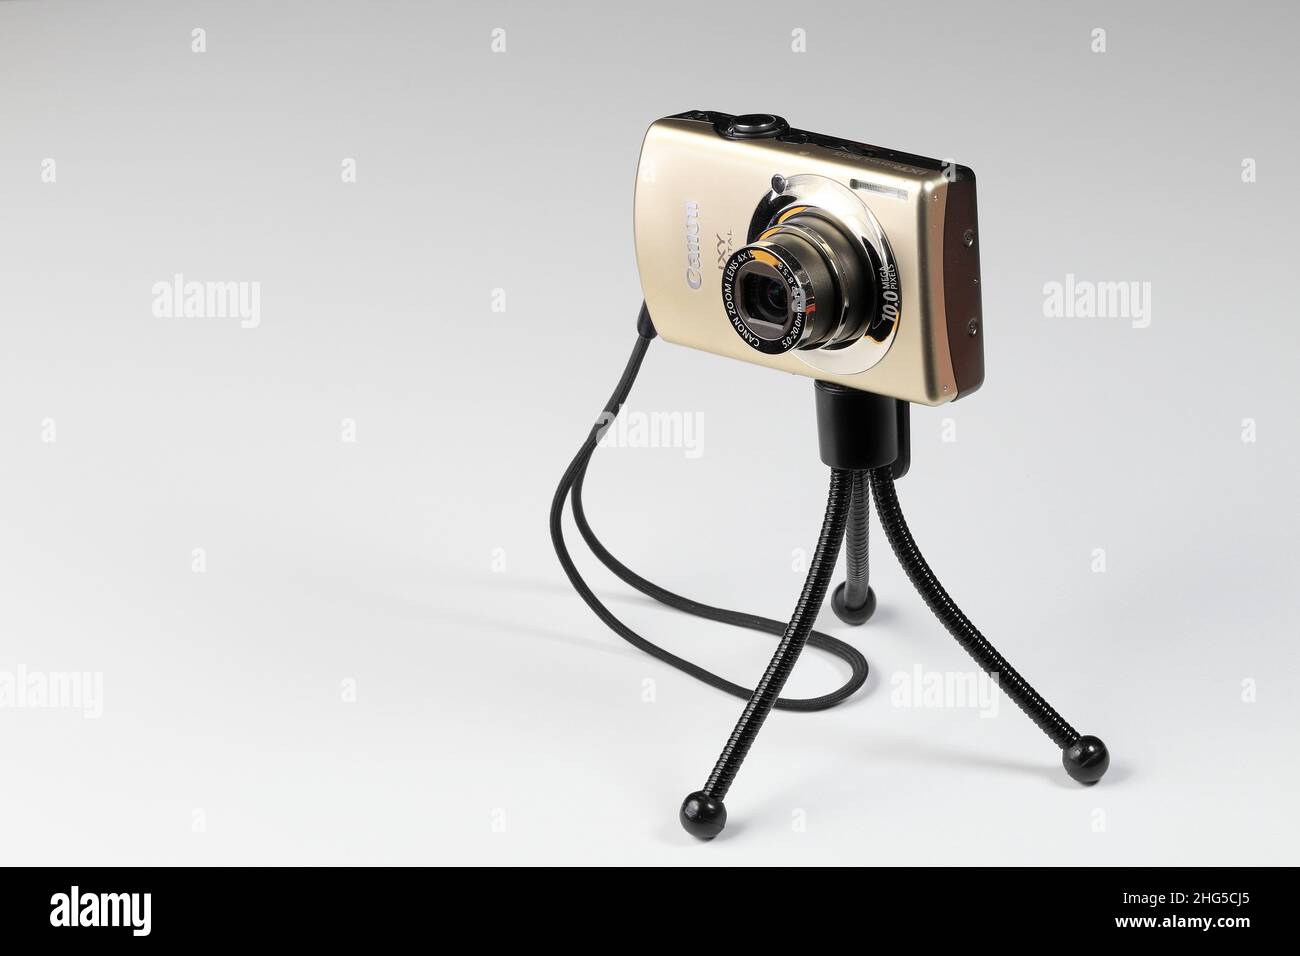 digital compact camera with hand strap and stretch lens on small tripod isolate on white background. Stock Photo